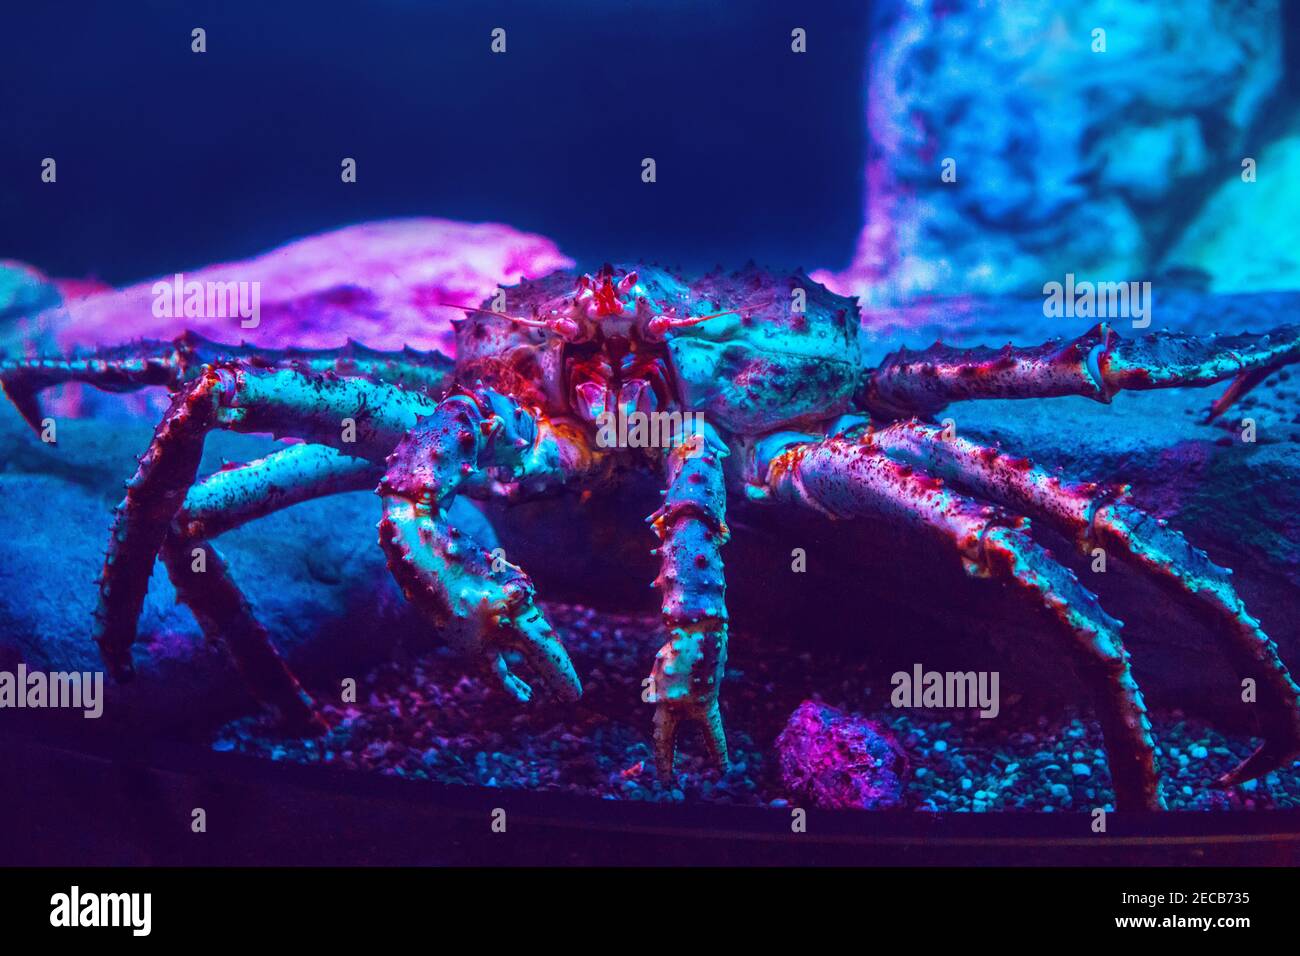 Giant crab lobster in blue red neon light under water in aquarium. Sea ocean marine wildlife animal with claws crawling on ground in water. Underwater Stock Photo